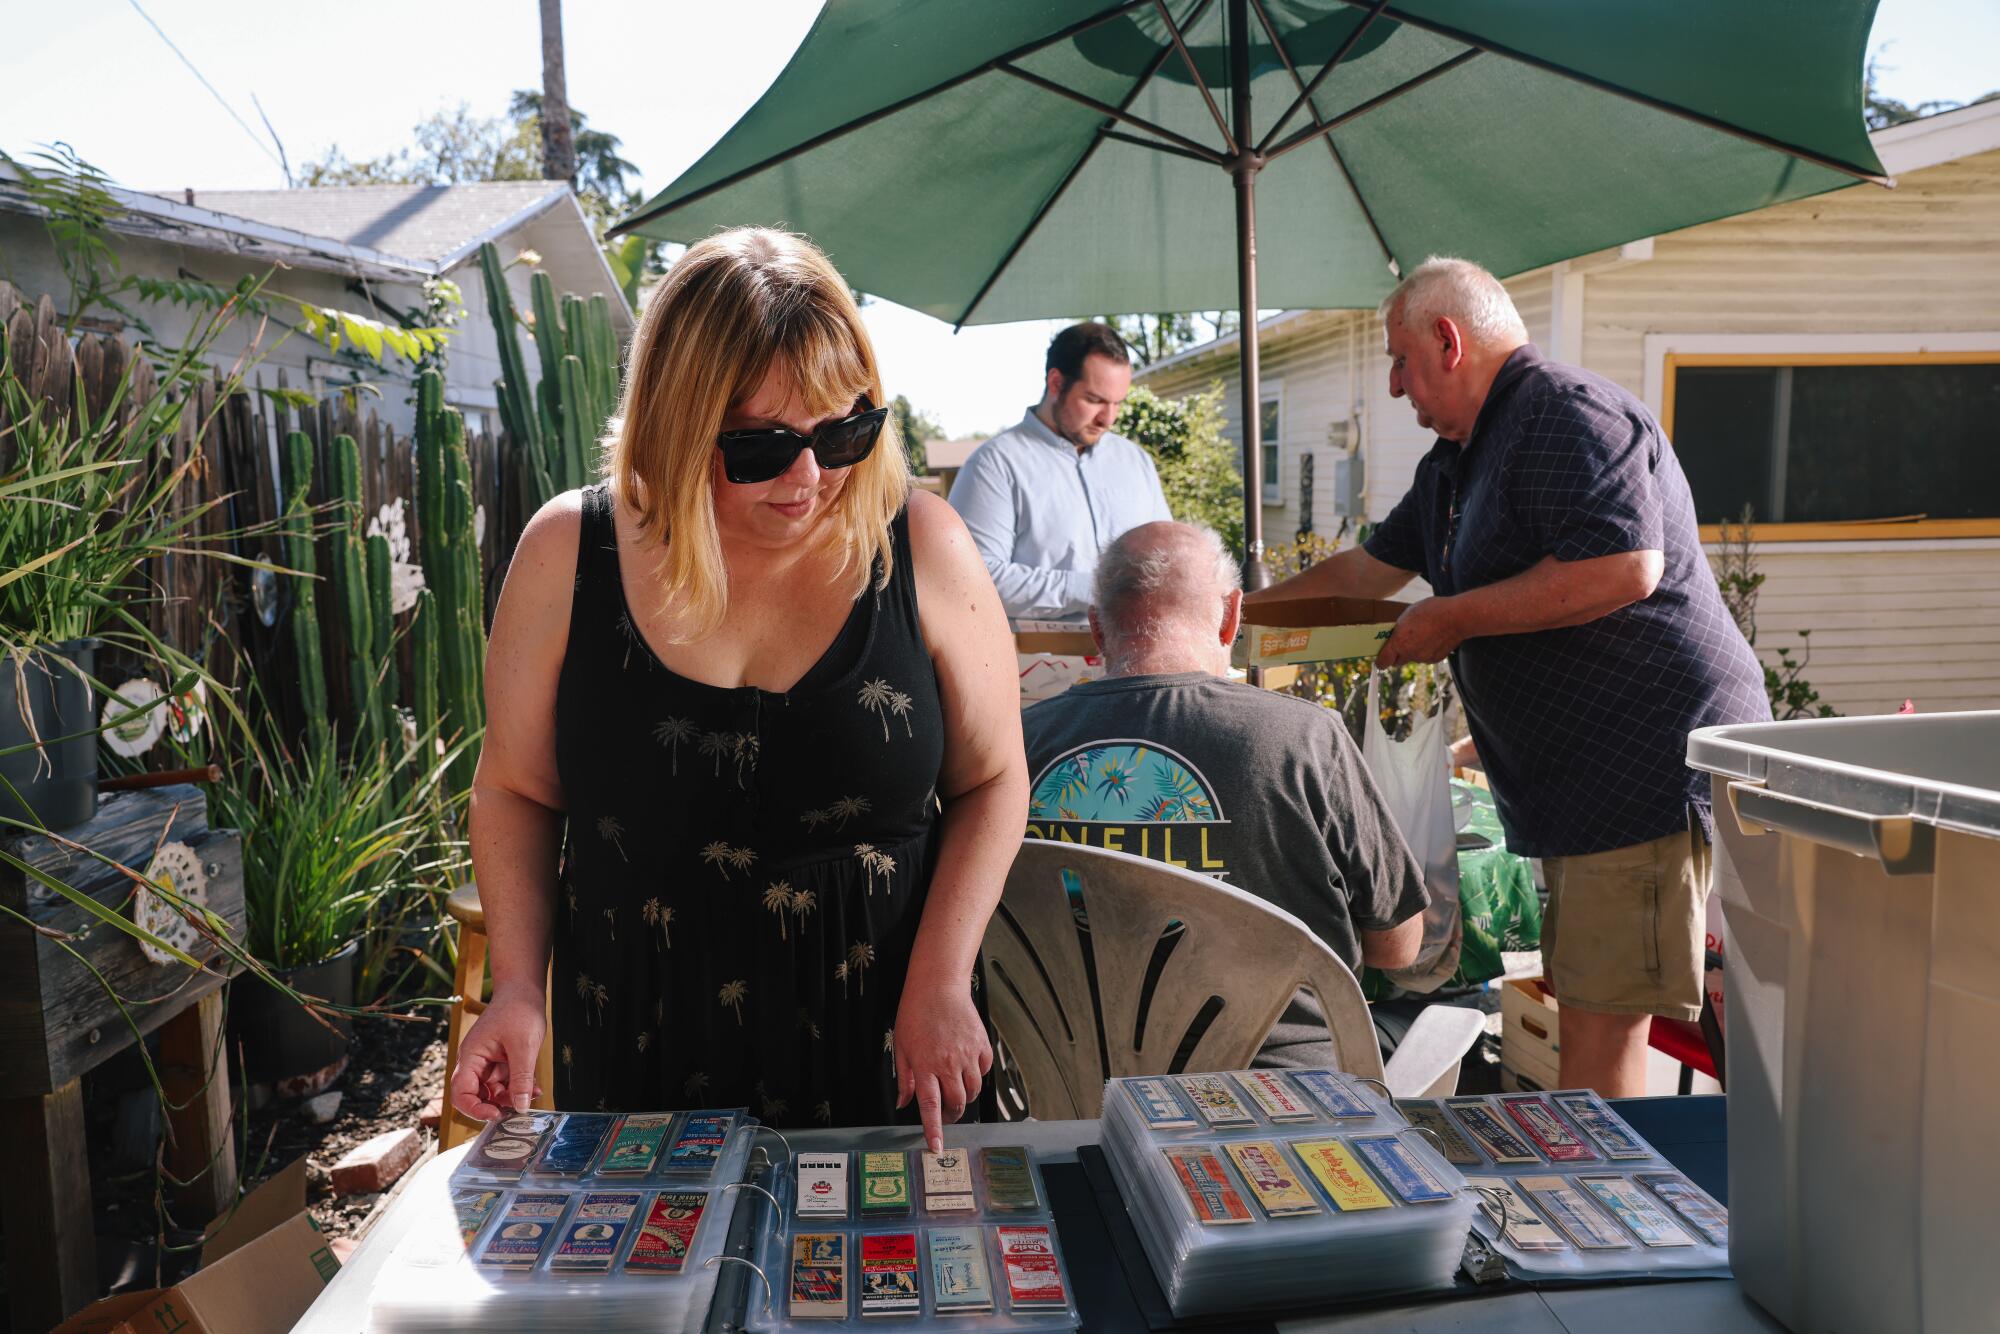 A woman stands outdoors leaning over a table that holds binders full of matchcovers.